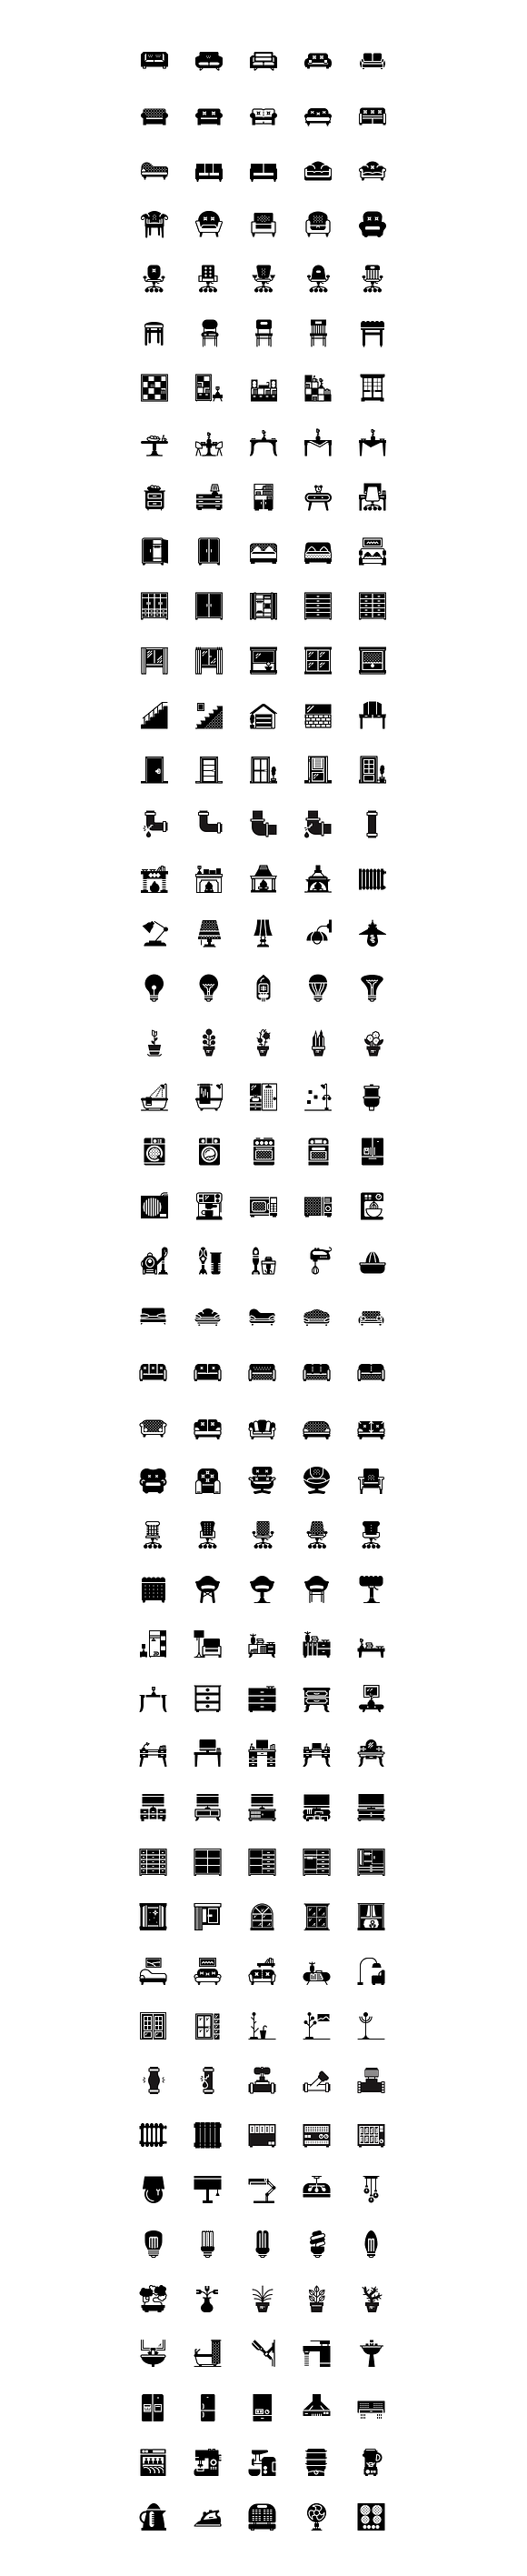 SMASHICONS - 920+ Households Icons - in Illustrations - product preview 2